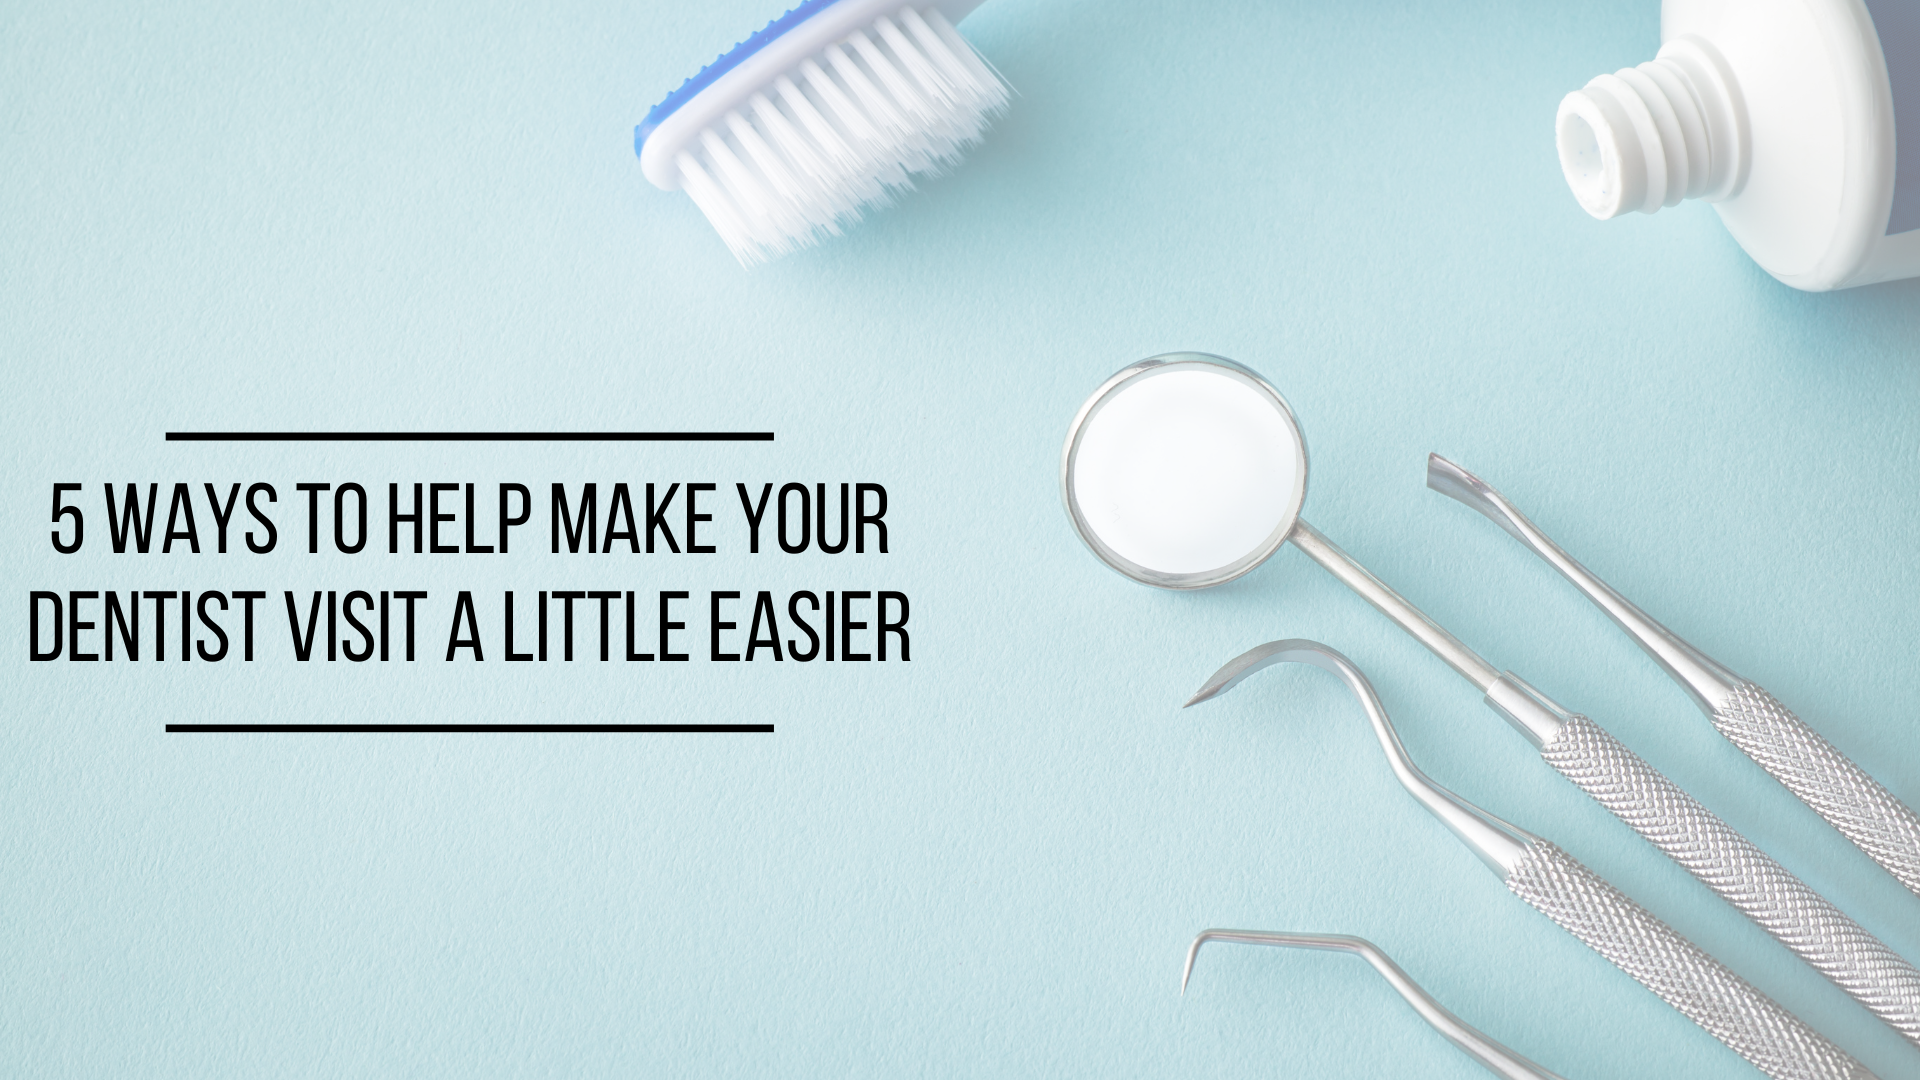 Why Are Dental Cleanings Painful? 5 Ways To Help Make Your Dentist Visit a Little Easier 